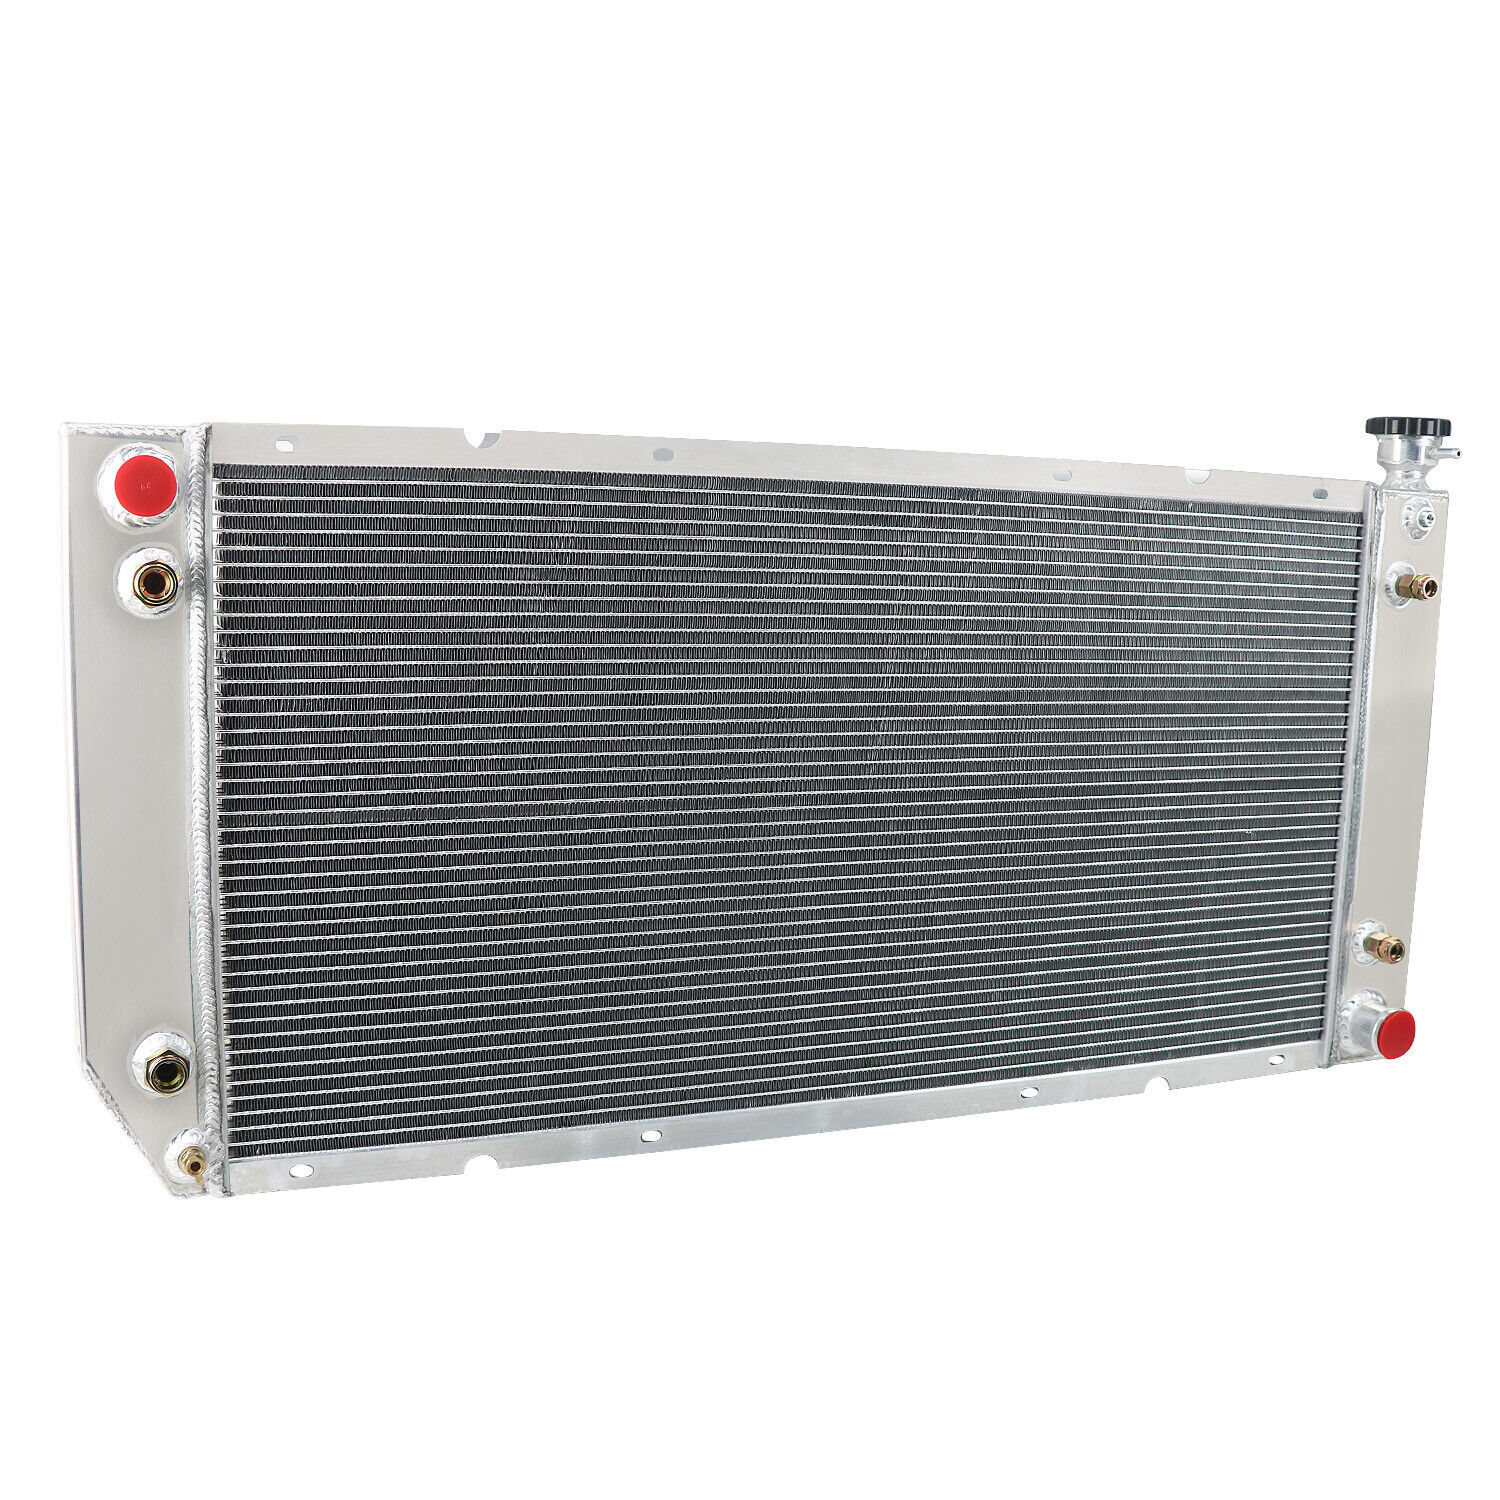 Aluminum 3-Row Radiator Fits For 1988-2000 Chevy C/~ C1500 2500 Truck 5.7L ~